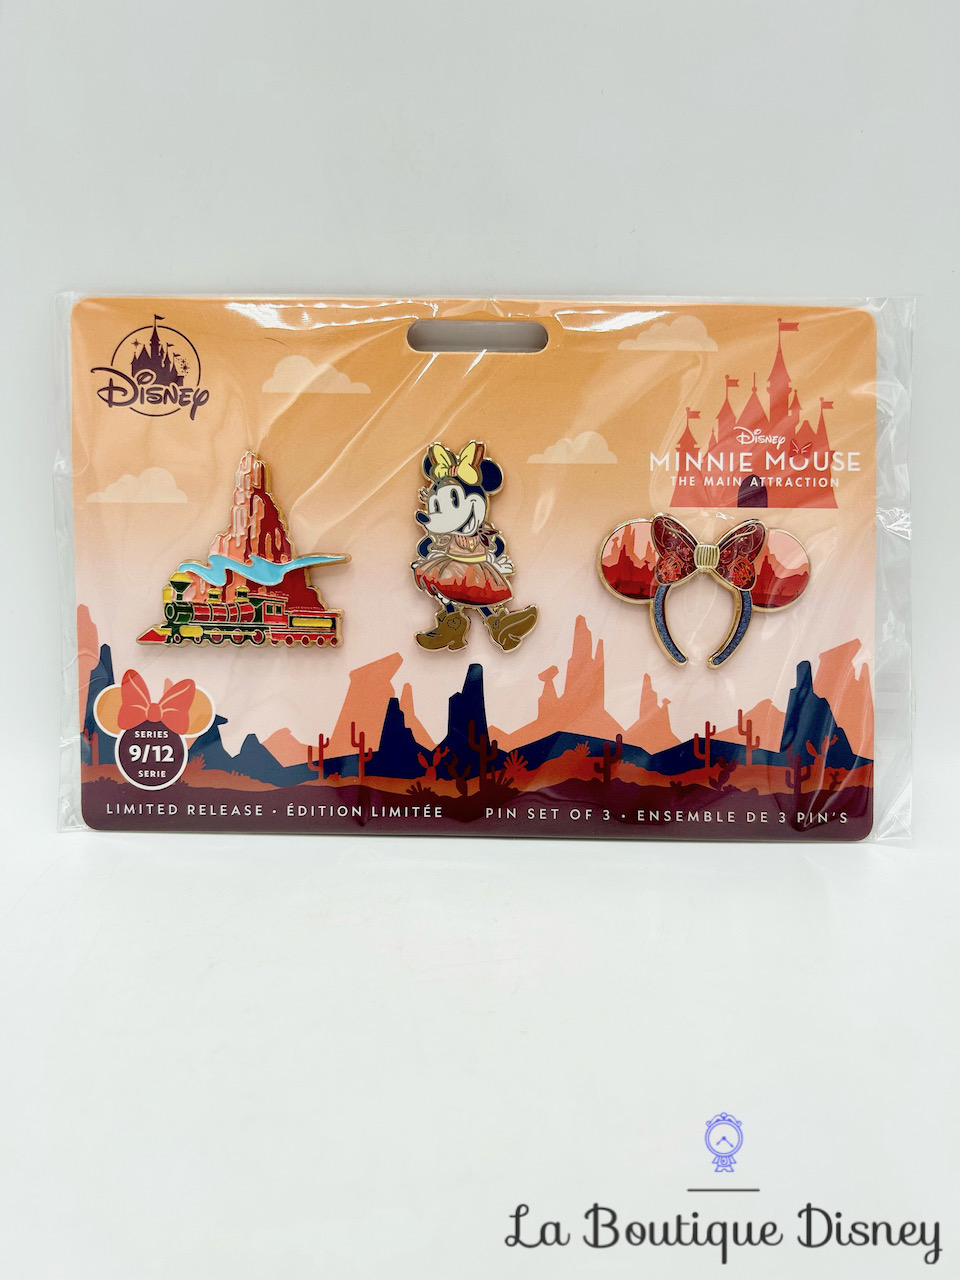 pin-minnie-mouse-the-main-attraction-big-thunder-mountain-series-9-12-disney-store-édition-limitée-2020-1